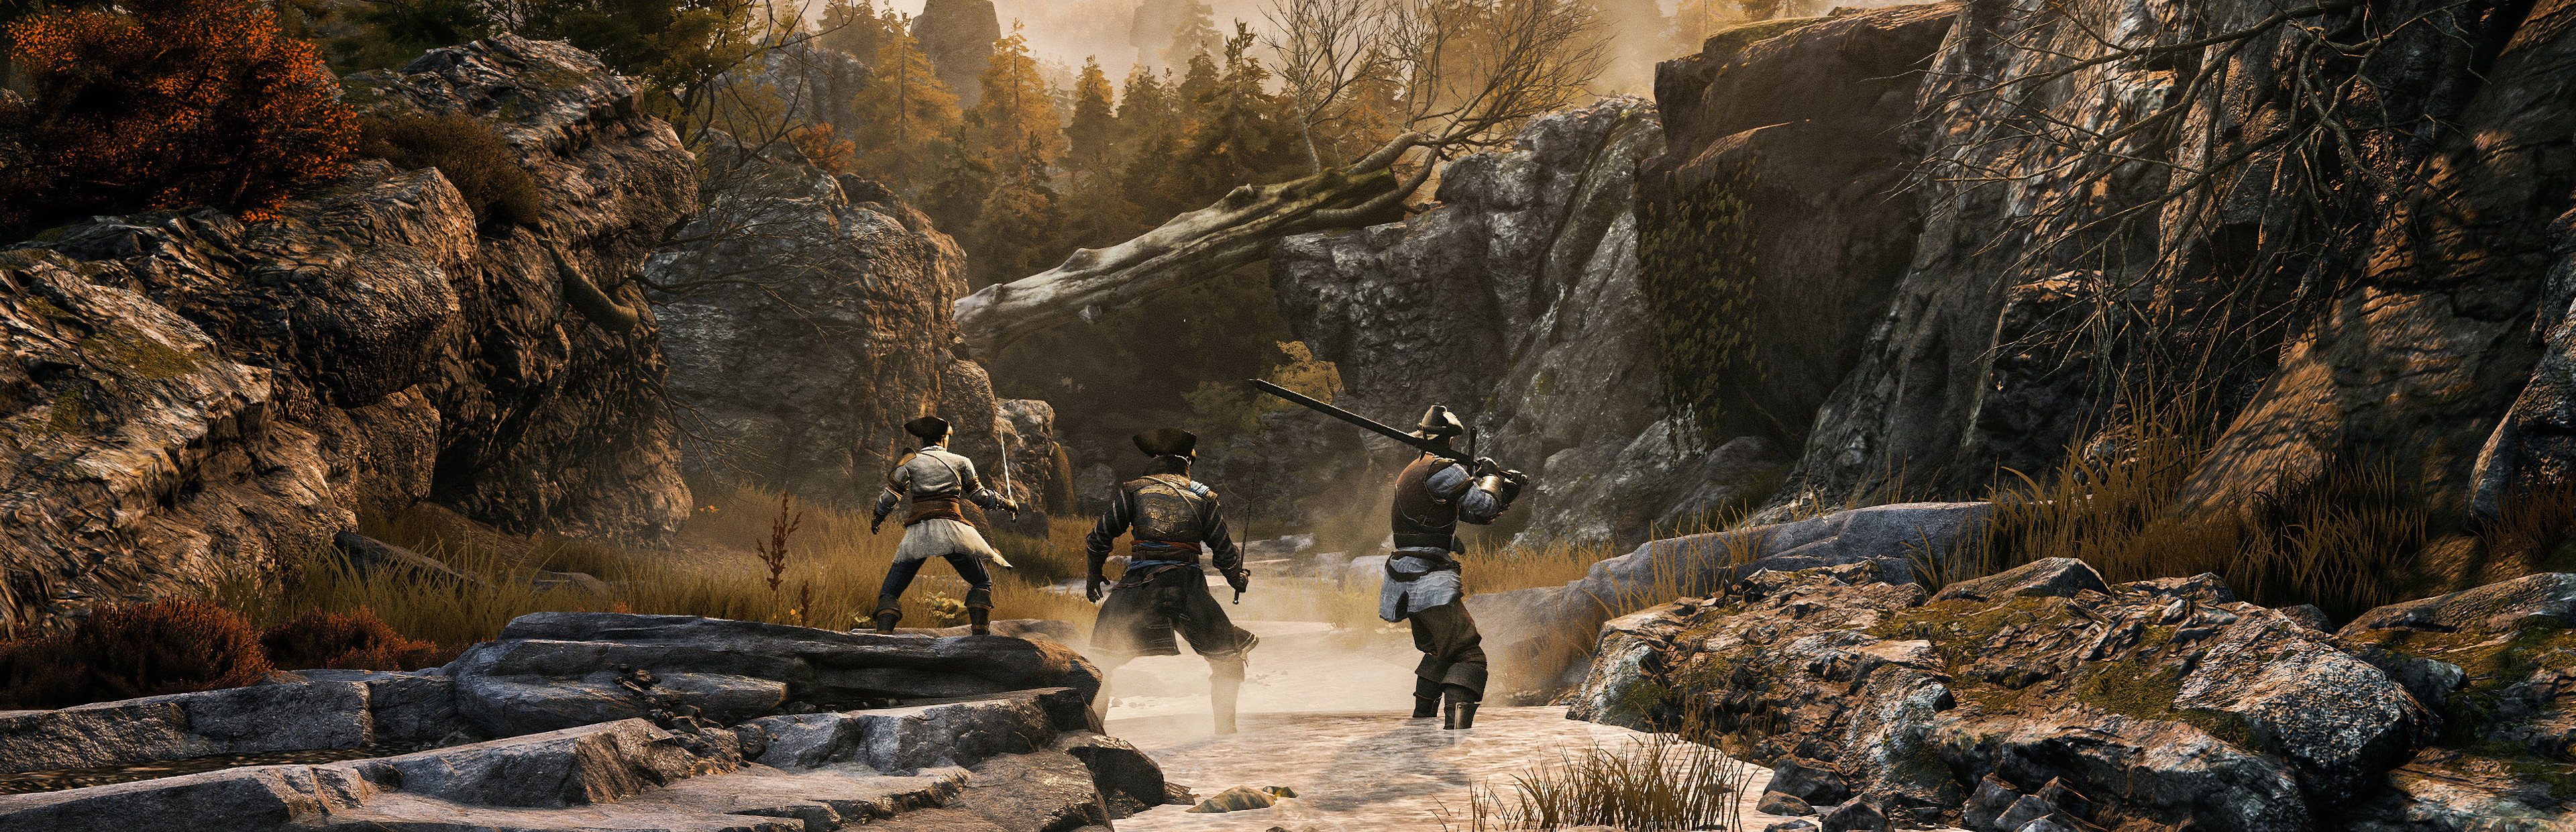 Ghost of Tsushima - SteamGridDB